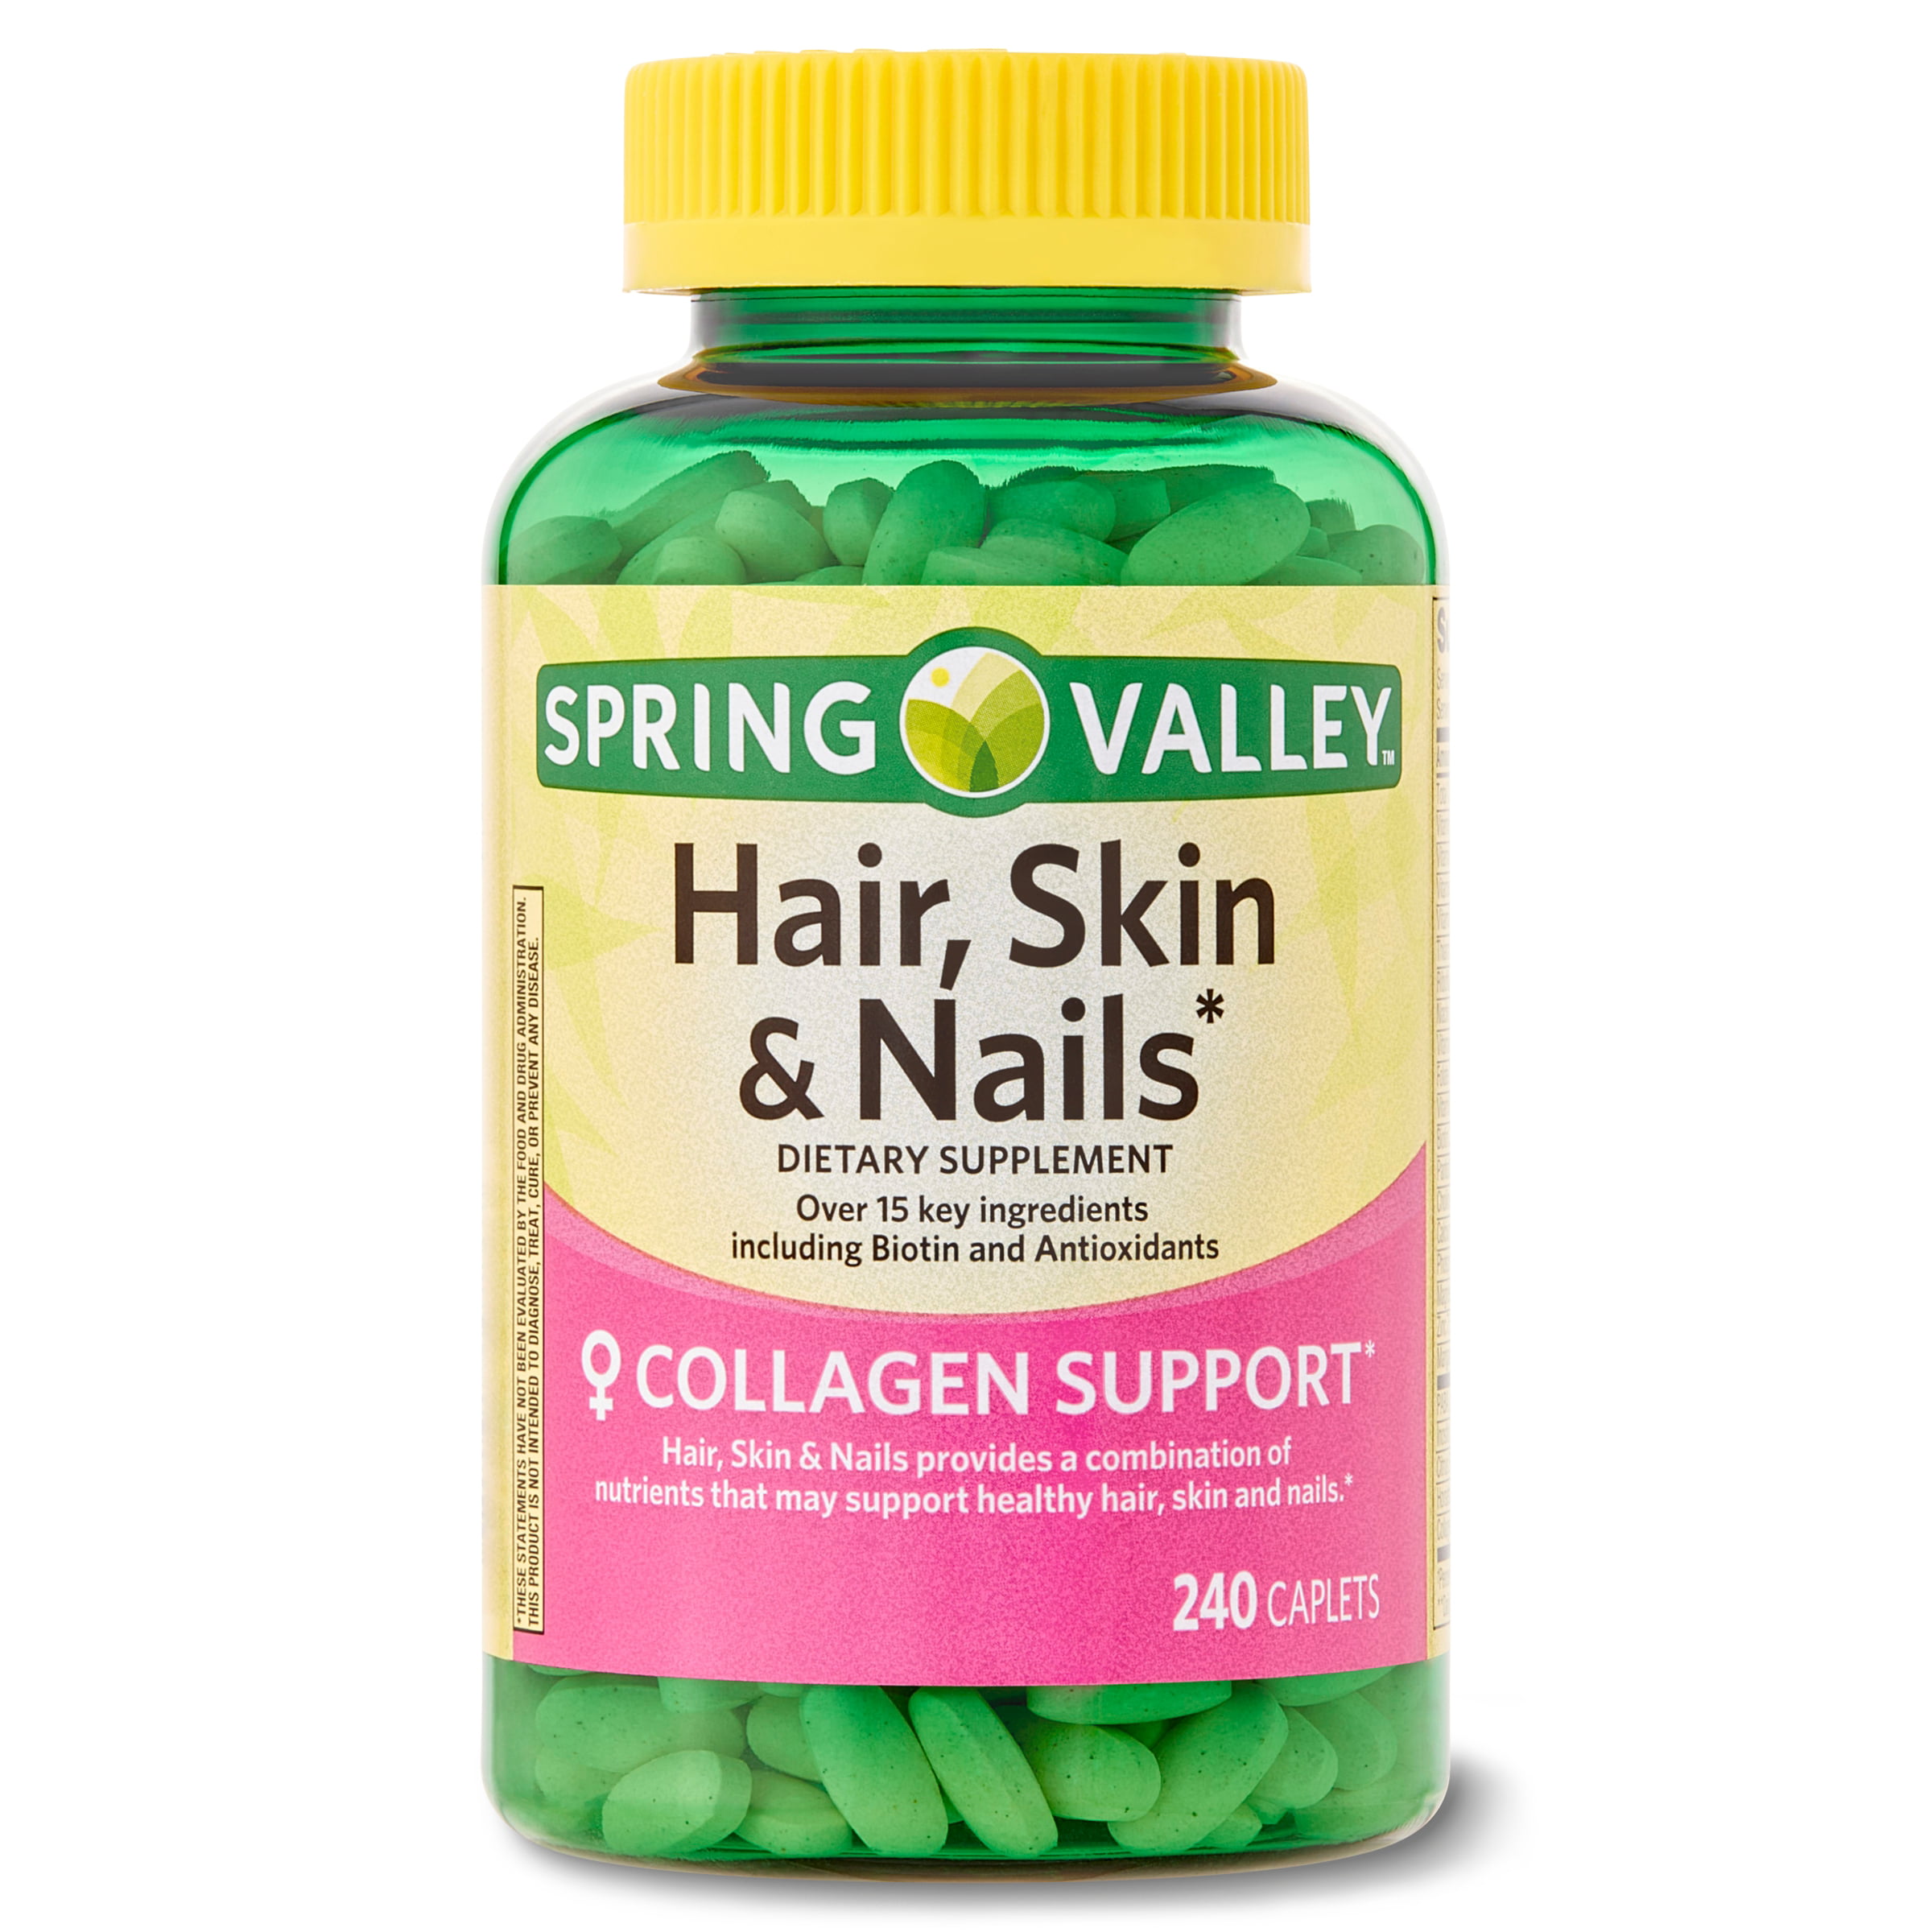 Buy Spring Valley Hair, Skin & Nails Caplets Dietary Supplement, 240 Count  Online at Lowest Price in Ubuy Nepal. 559310457